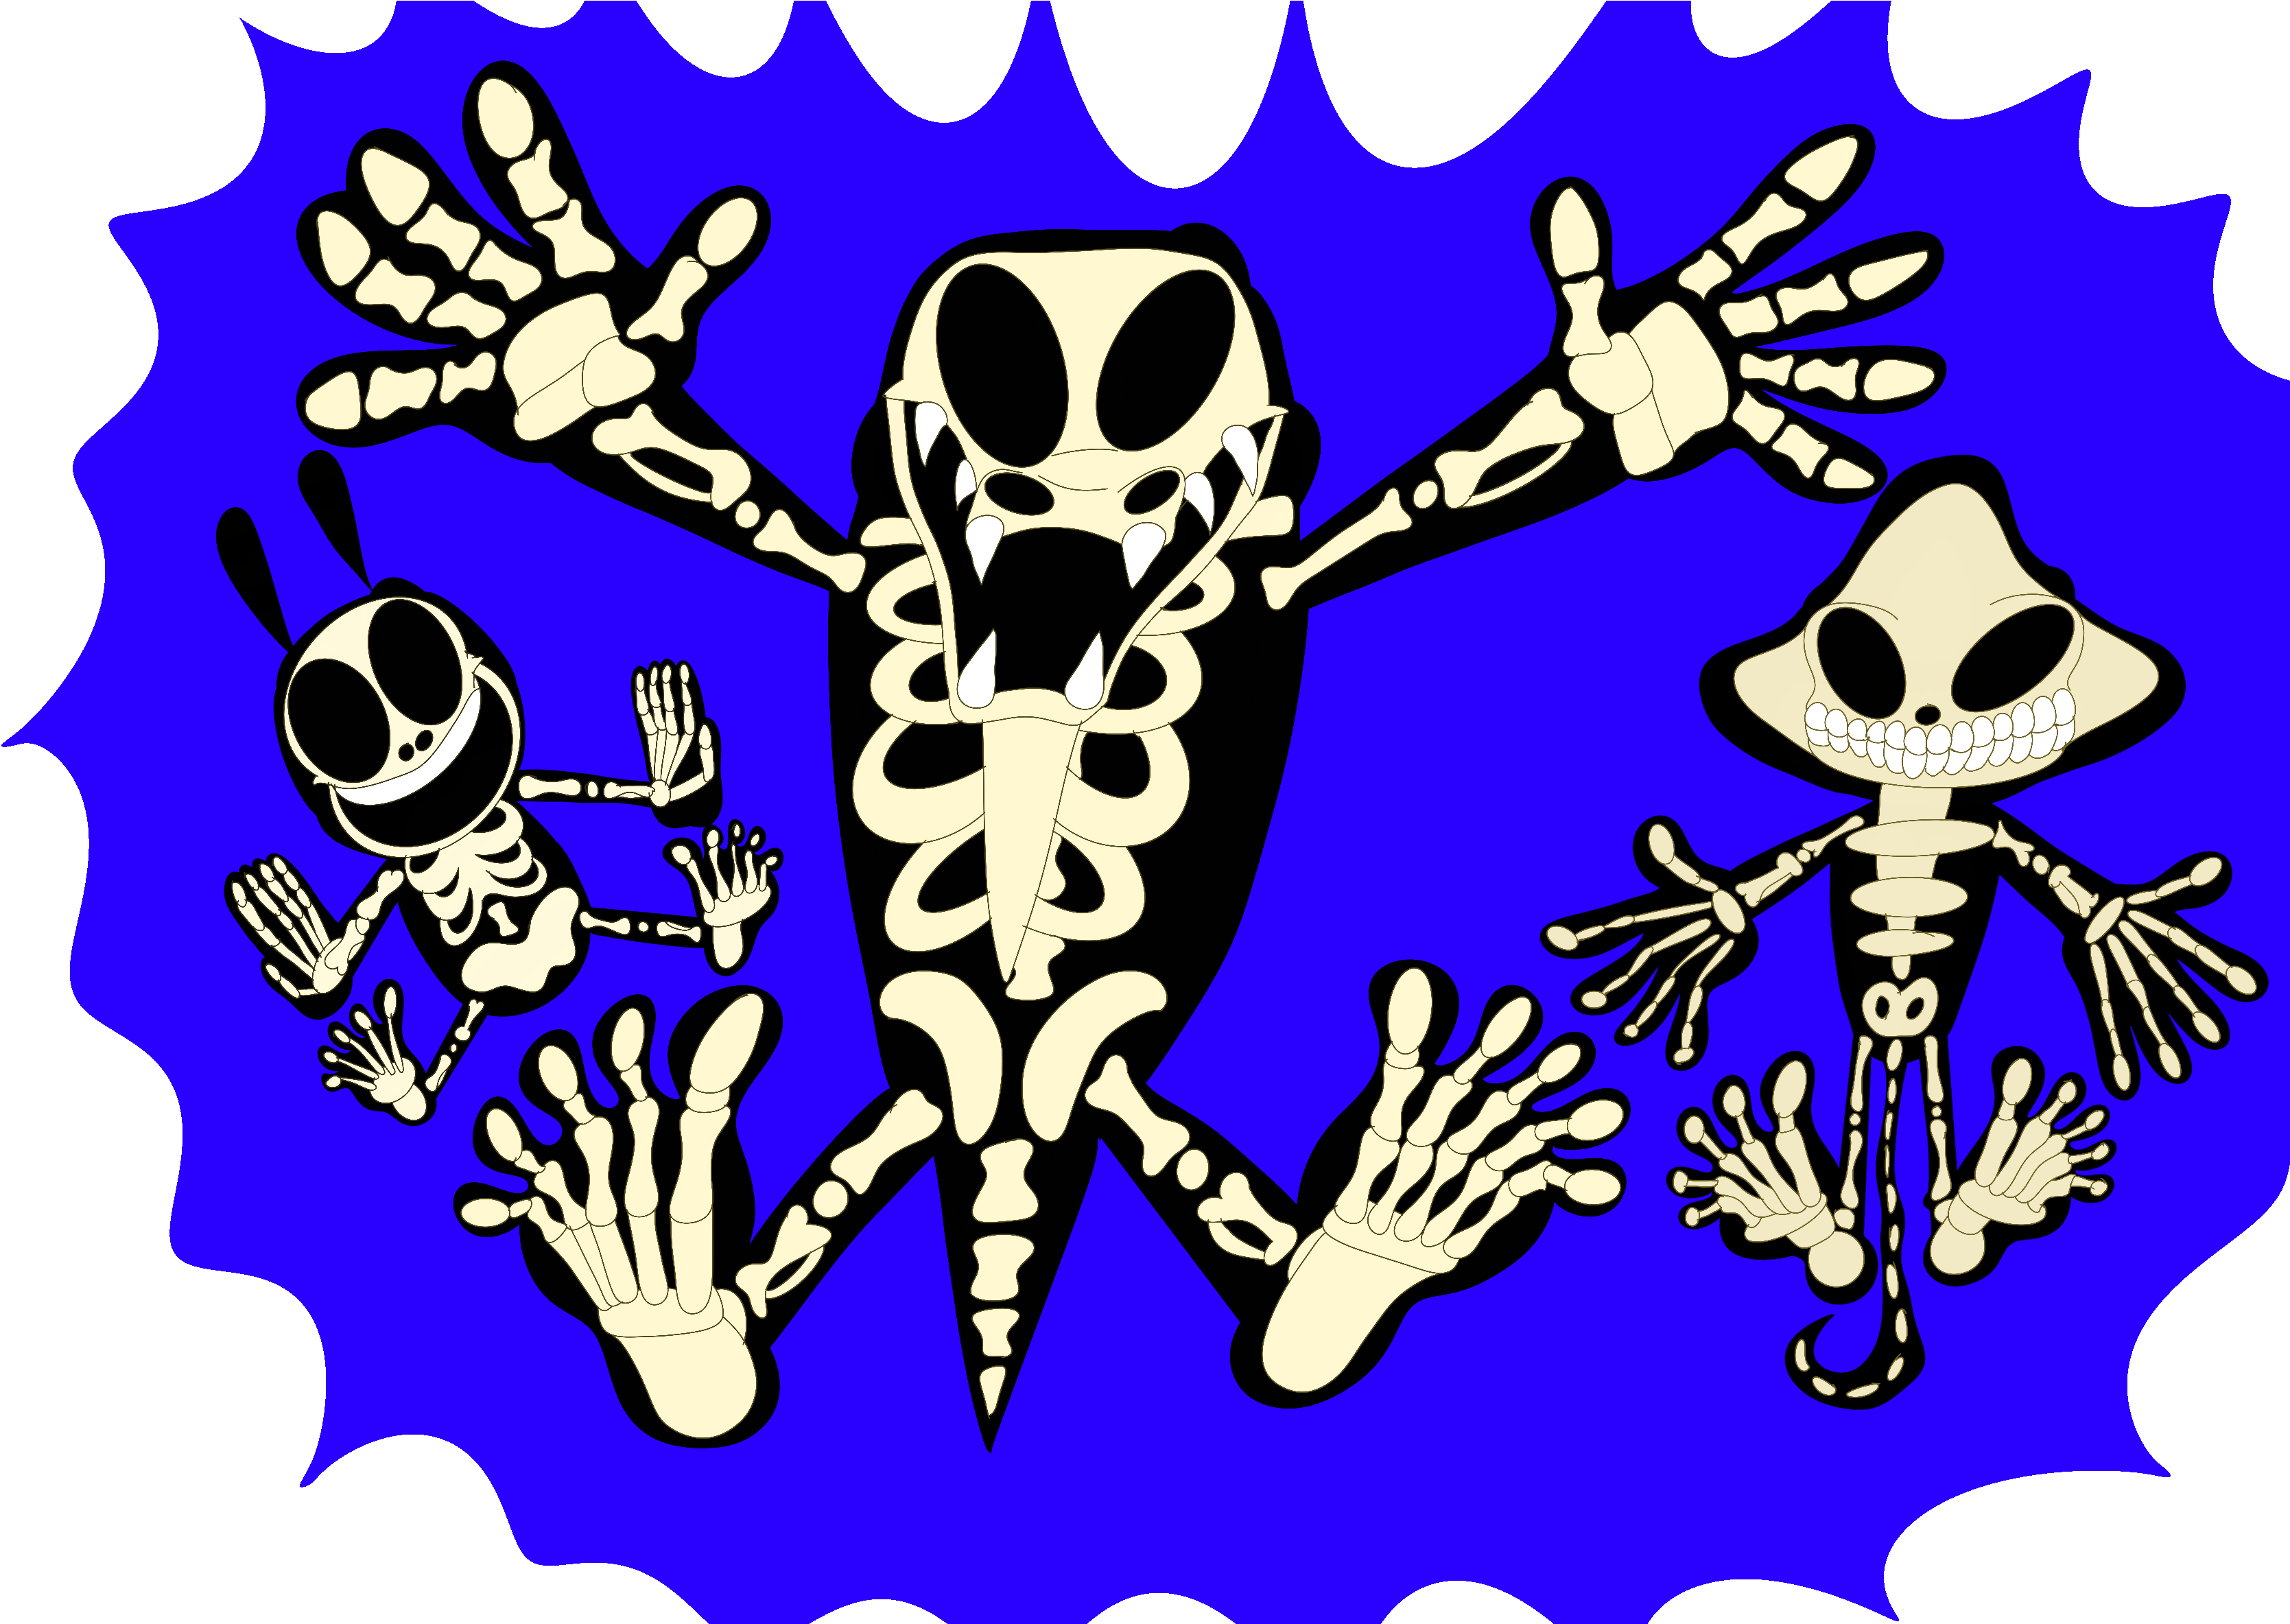 A Cartoon Of Skeletons On A Blue Background